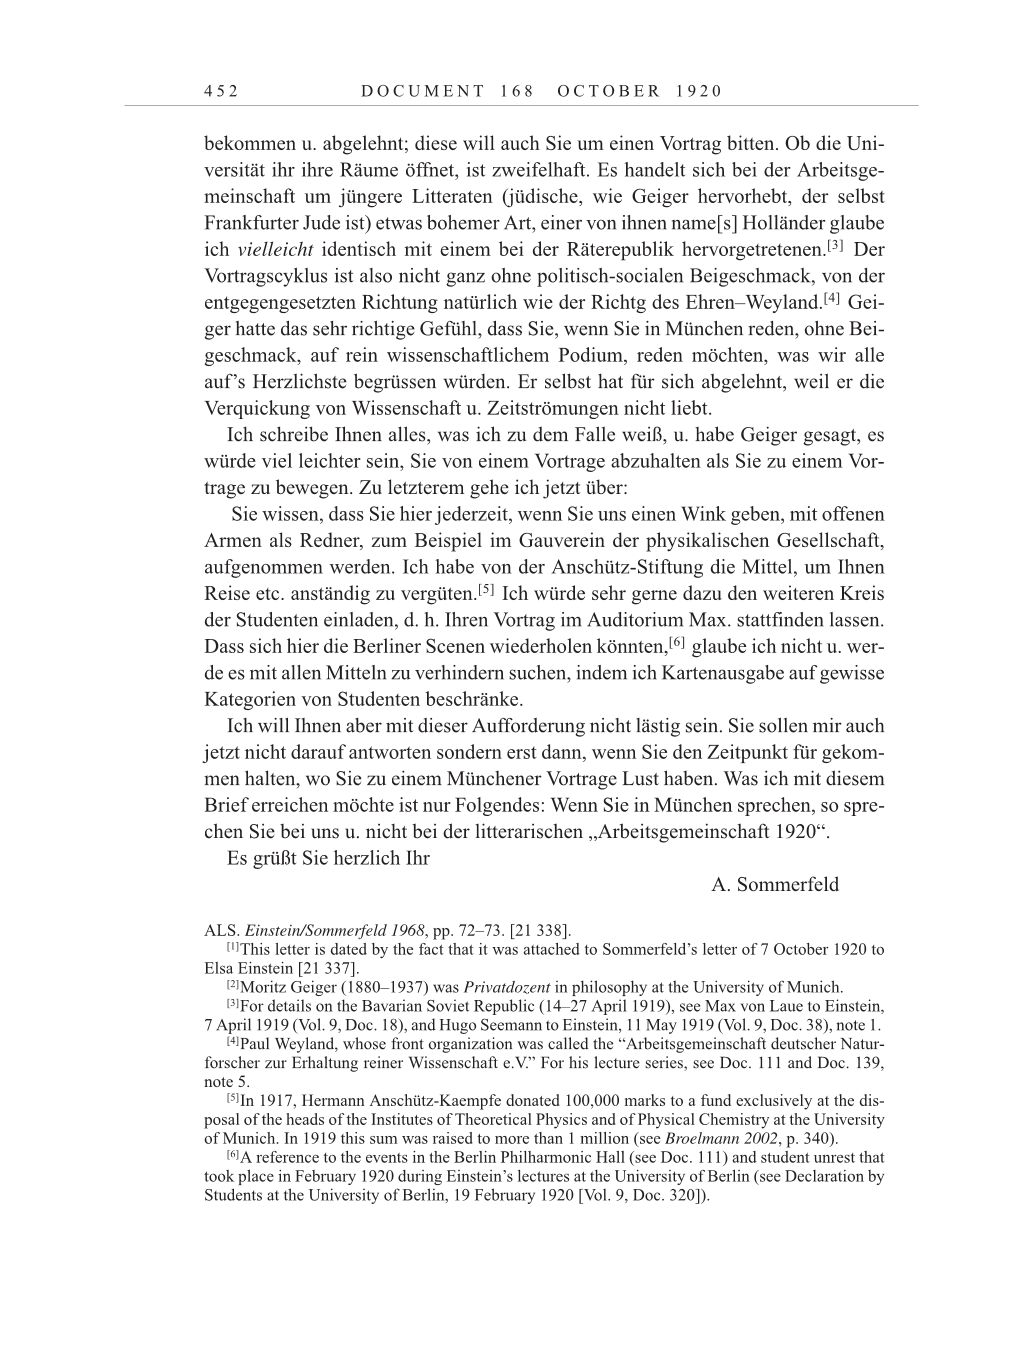 Volume 10: The Berlin Years: Correspondence May-December 1920 / Supplementary Correspondence 1909-1920 page 452